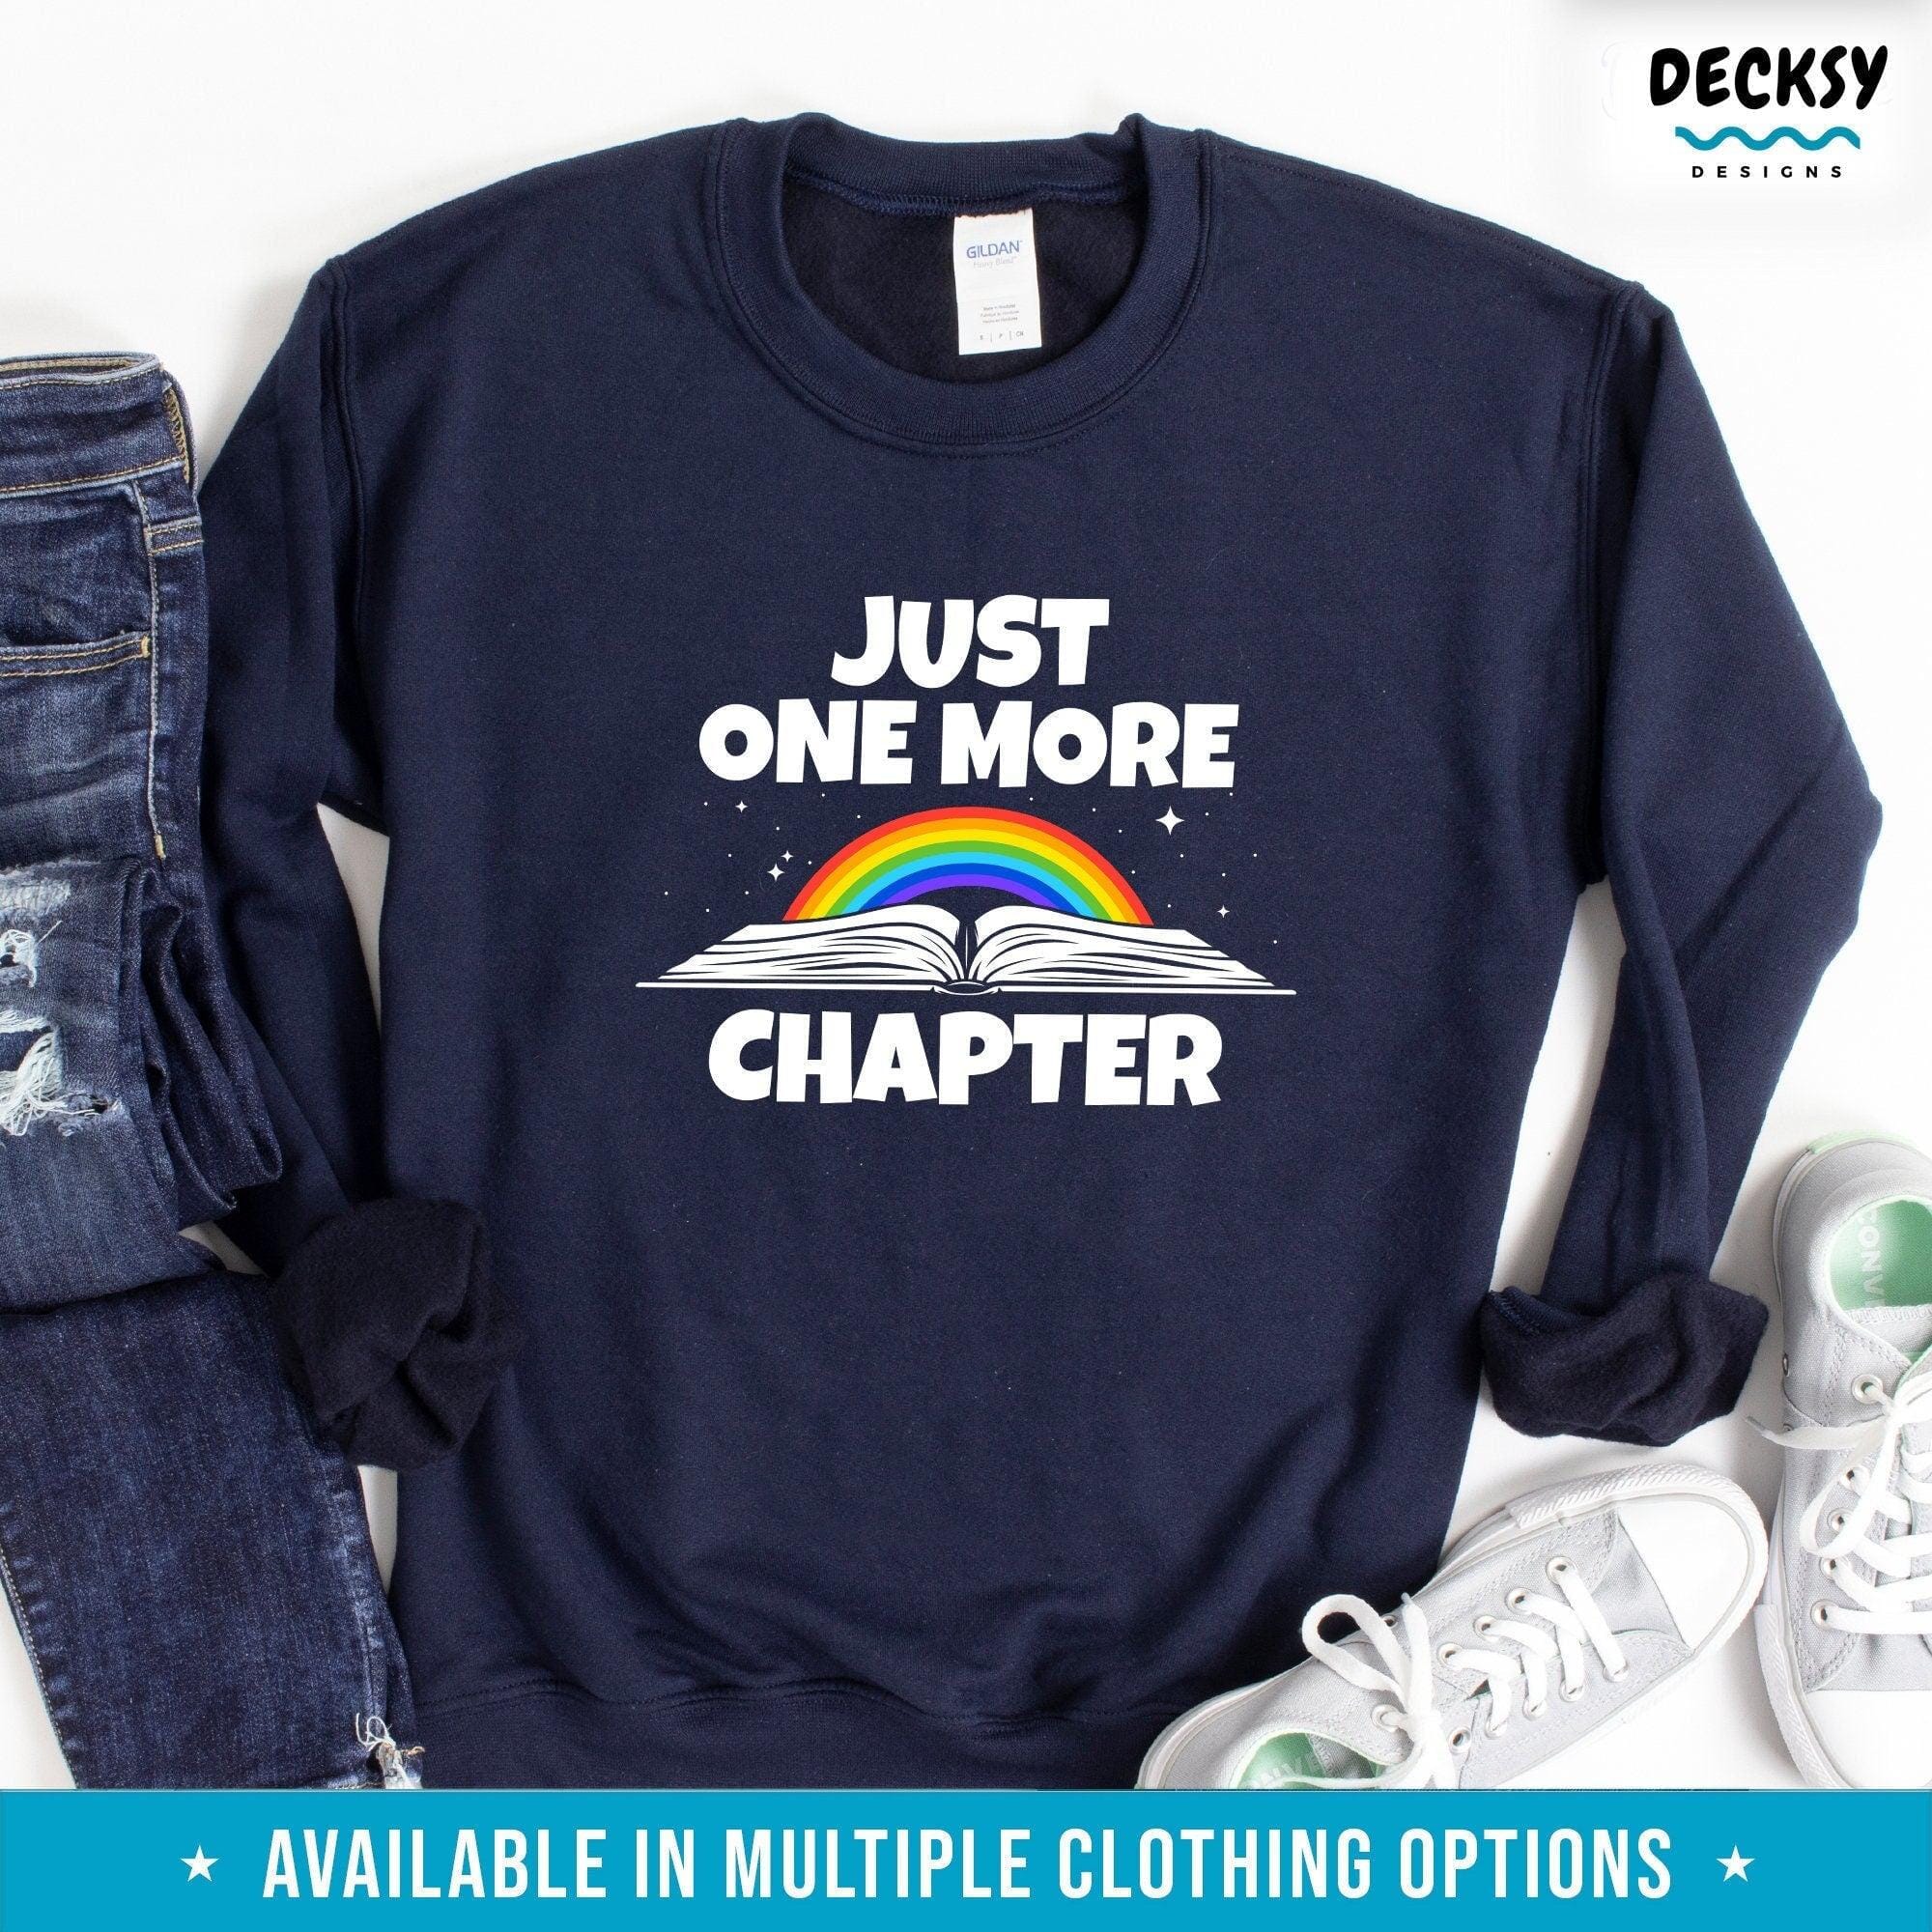 Reading Shirt, Gift For Book Lover-Clothing:Gender-Neutral Adult Clothing:Tops & Tees:T-shirts:Graphic Tees-DecksyDesigns